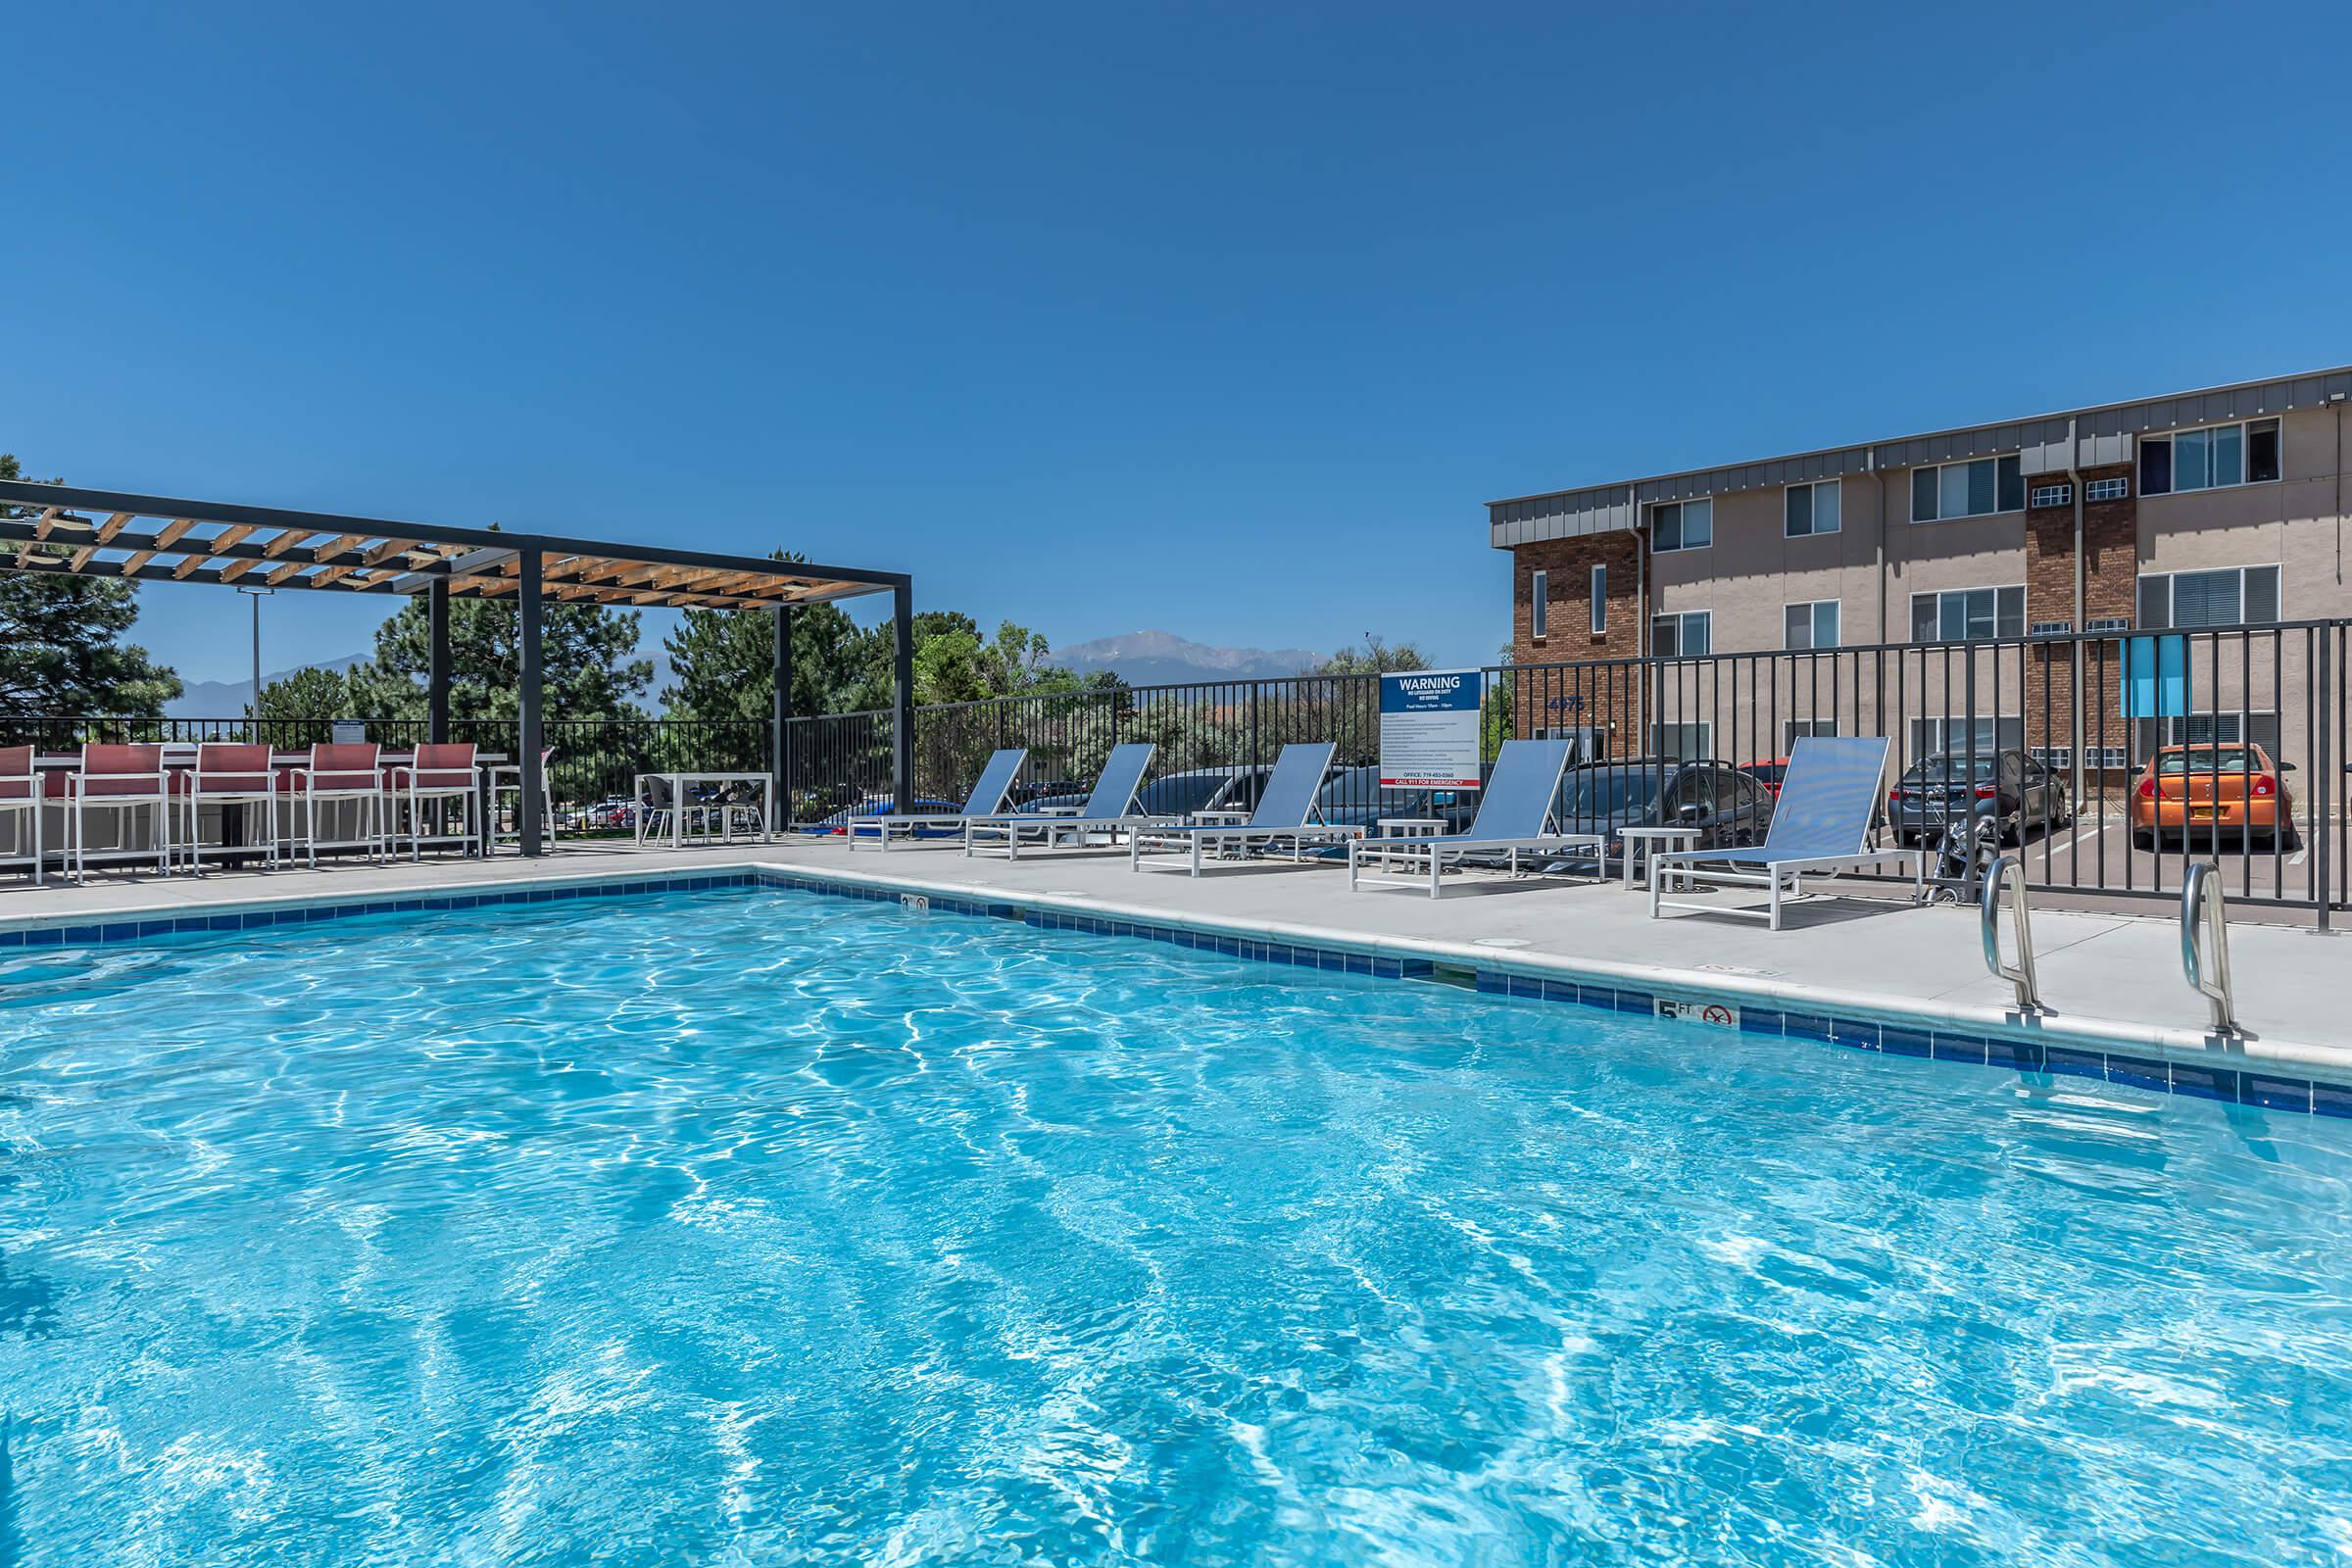 Swimming pool with lounge chairs at North 49 Apartments, located in Colorado Springs, CO